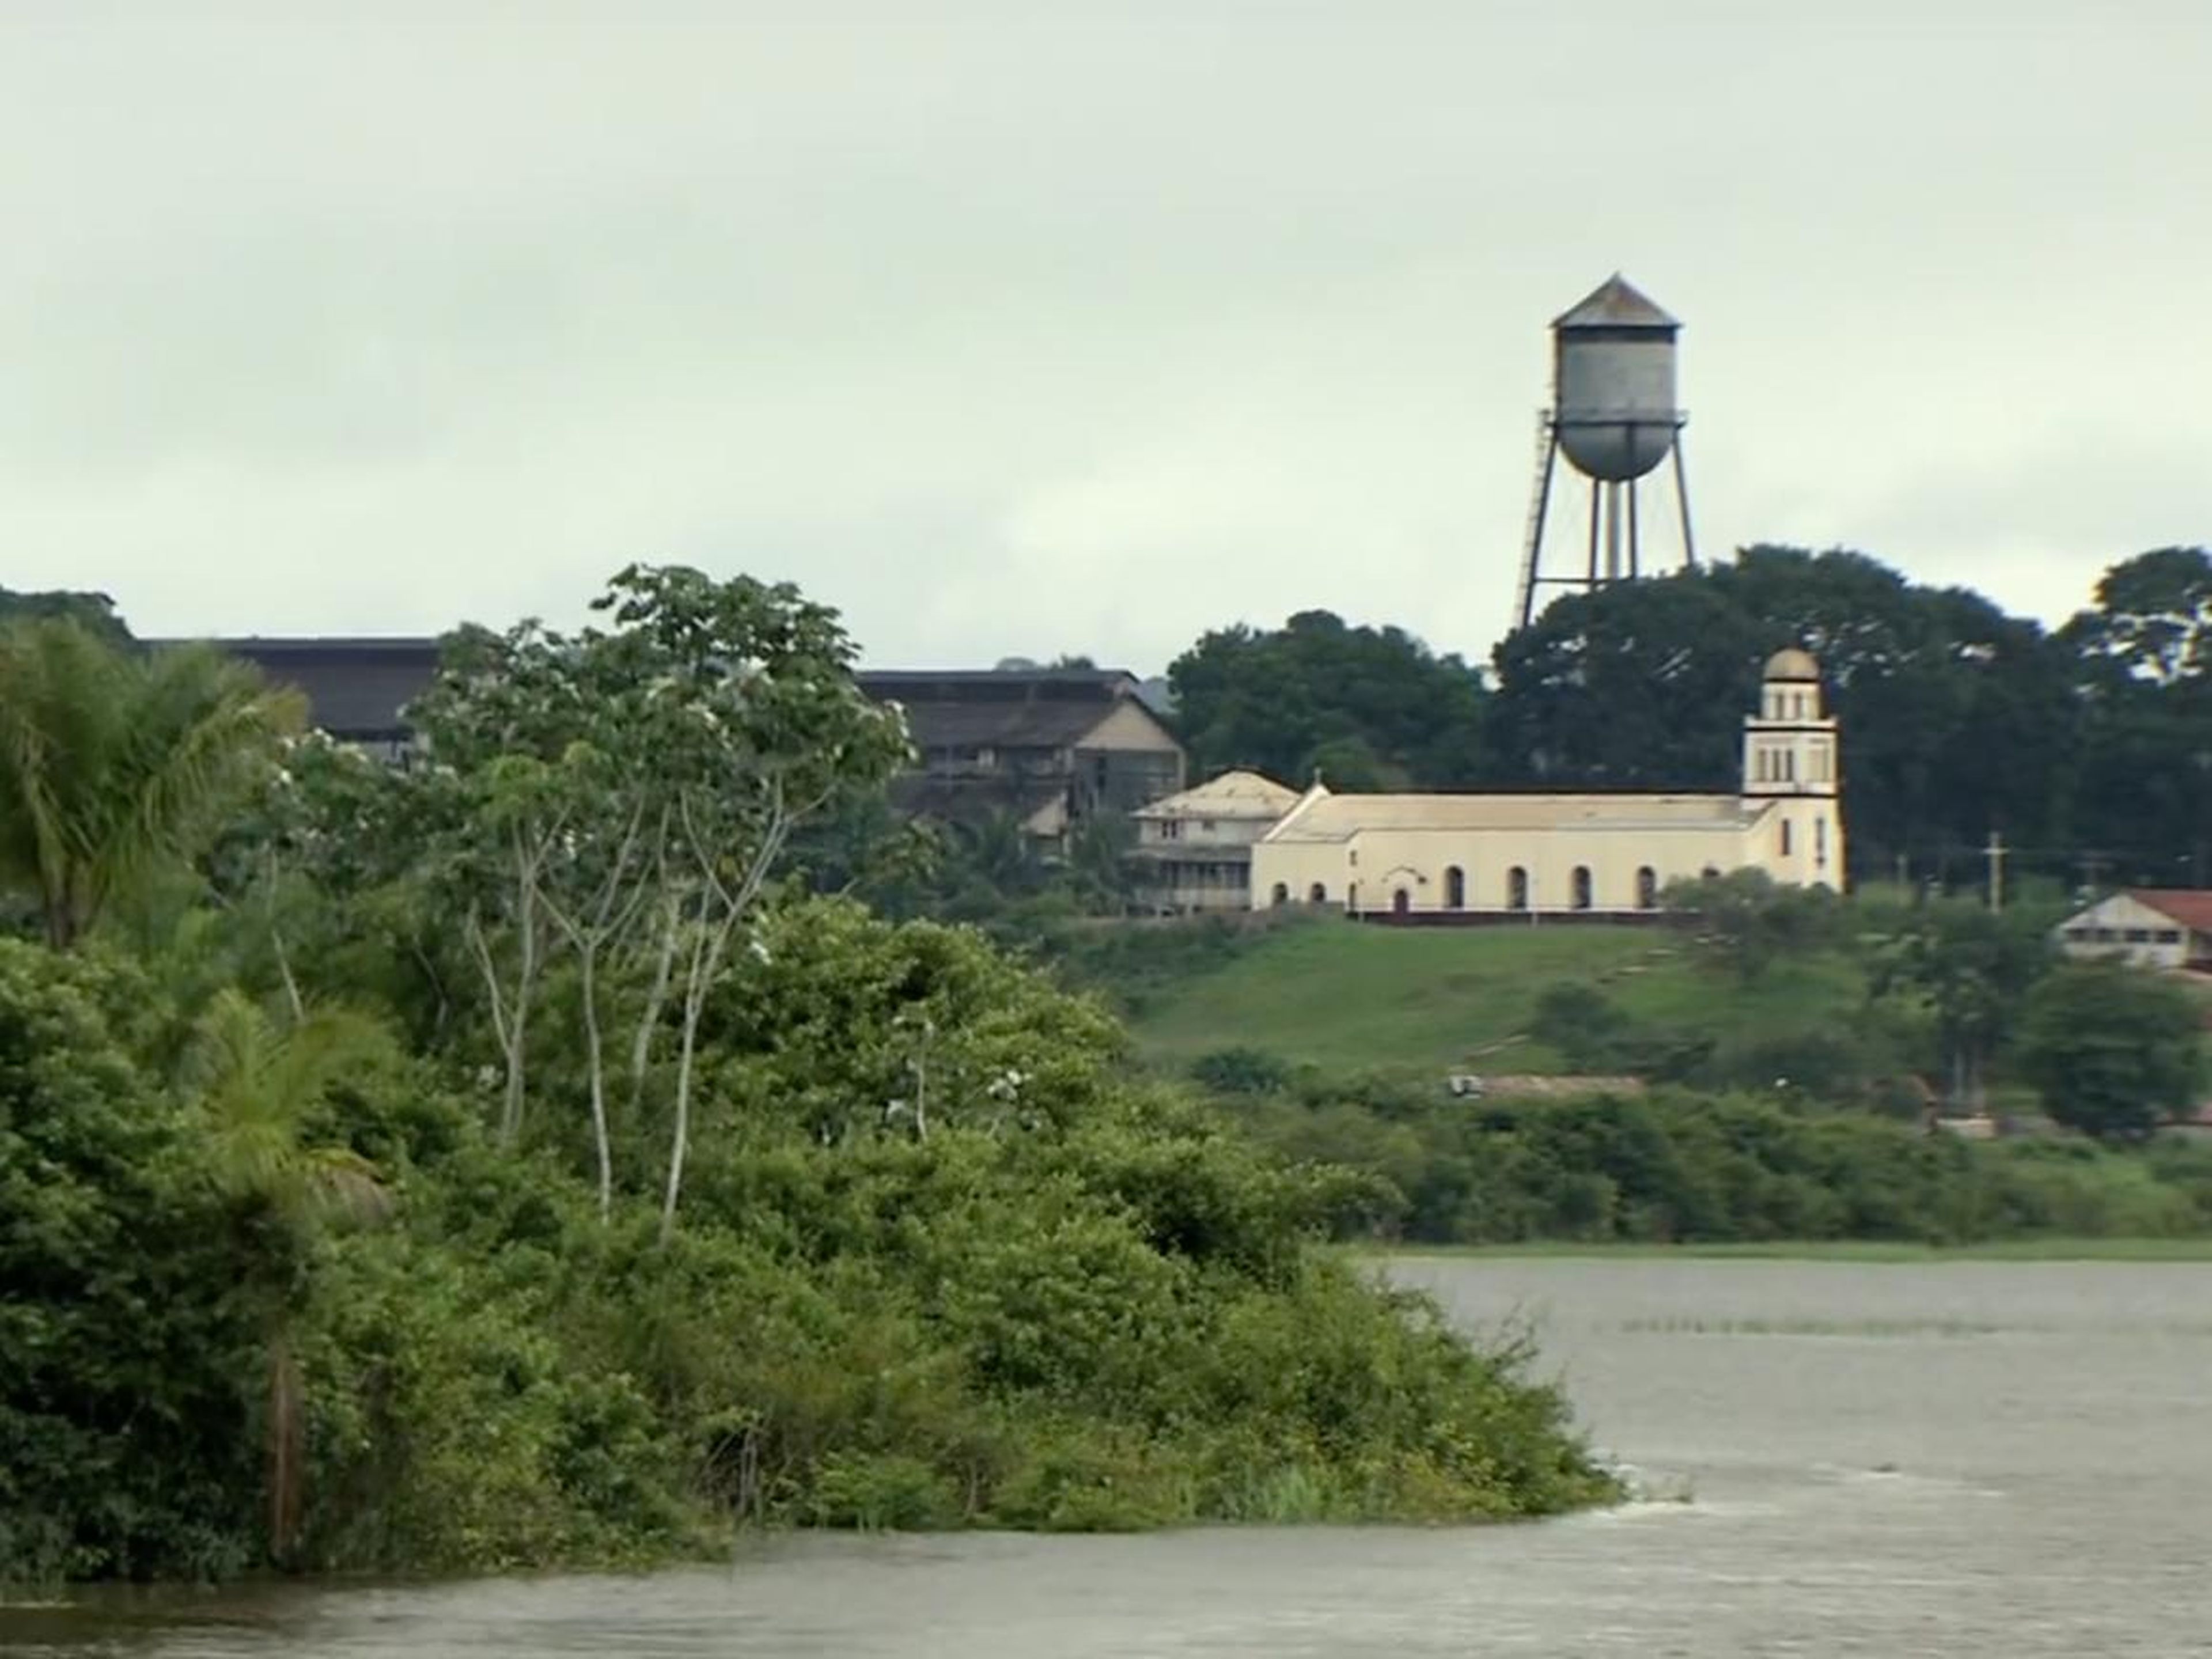 Footage from the BBC shows what's left of Fordlandia.